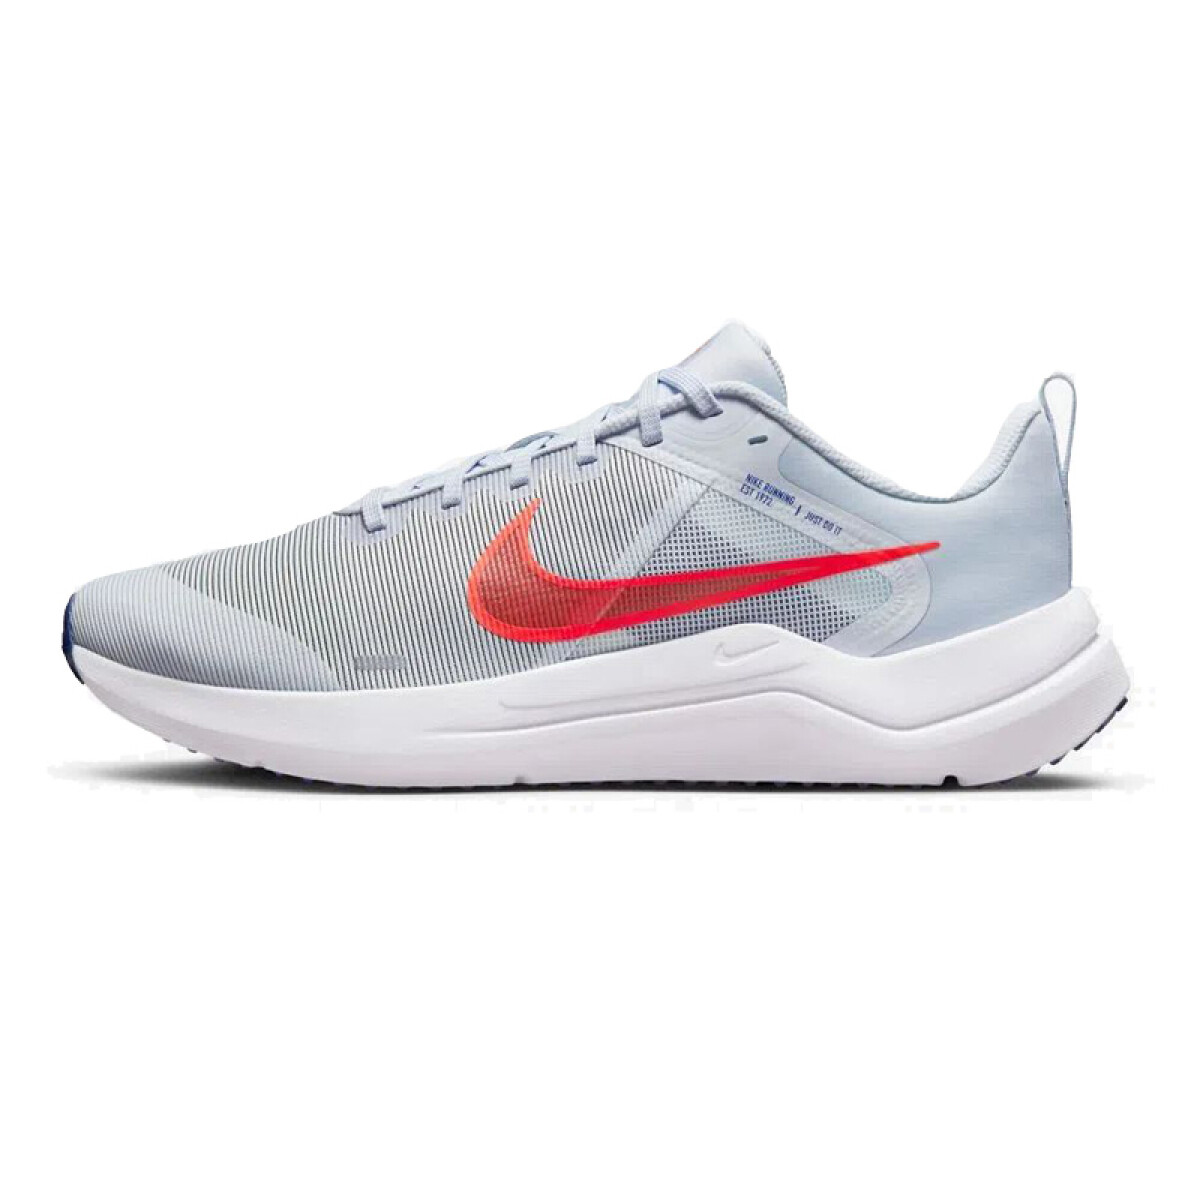 Champion Nike Running Hombre Downshifter 12 Ftbll Gry - S/C 